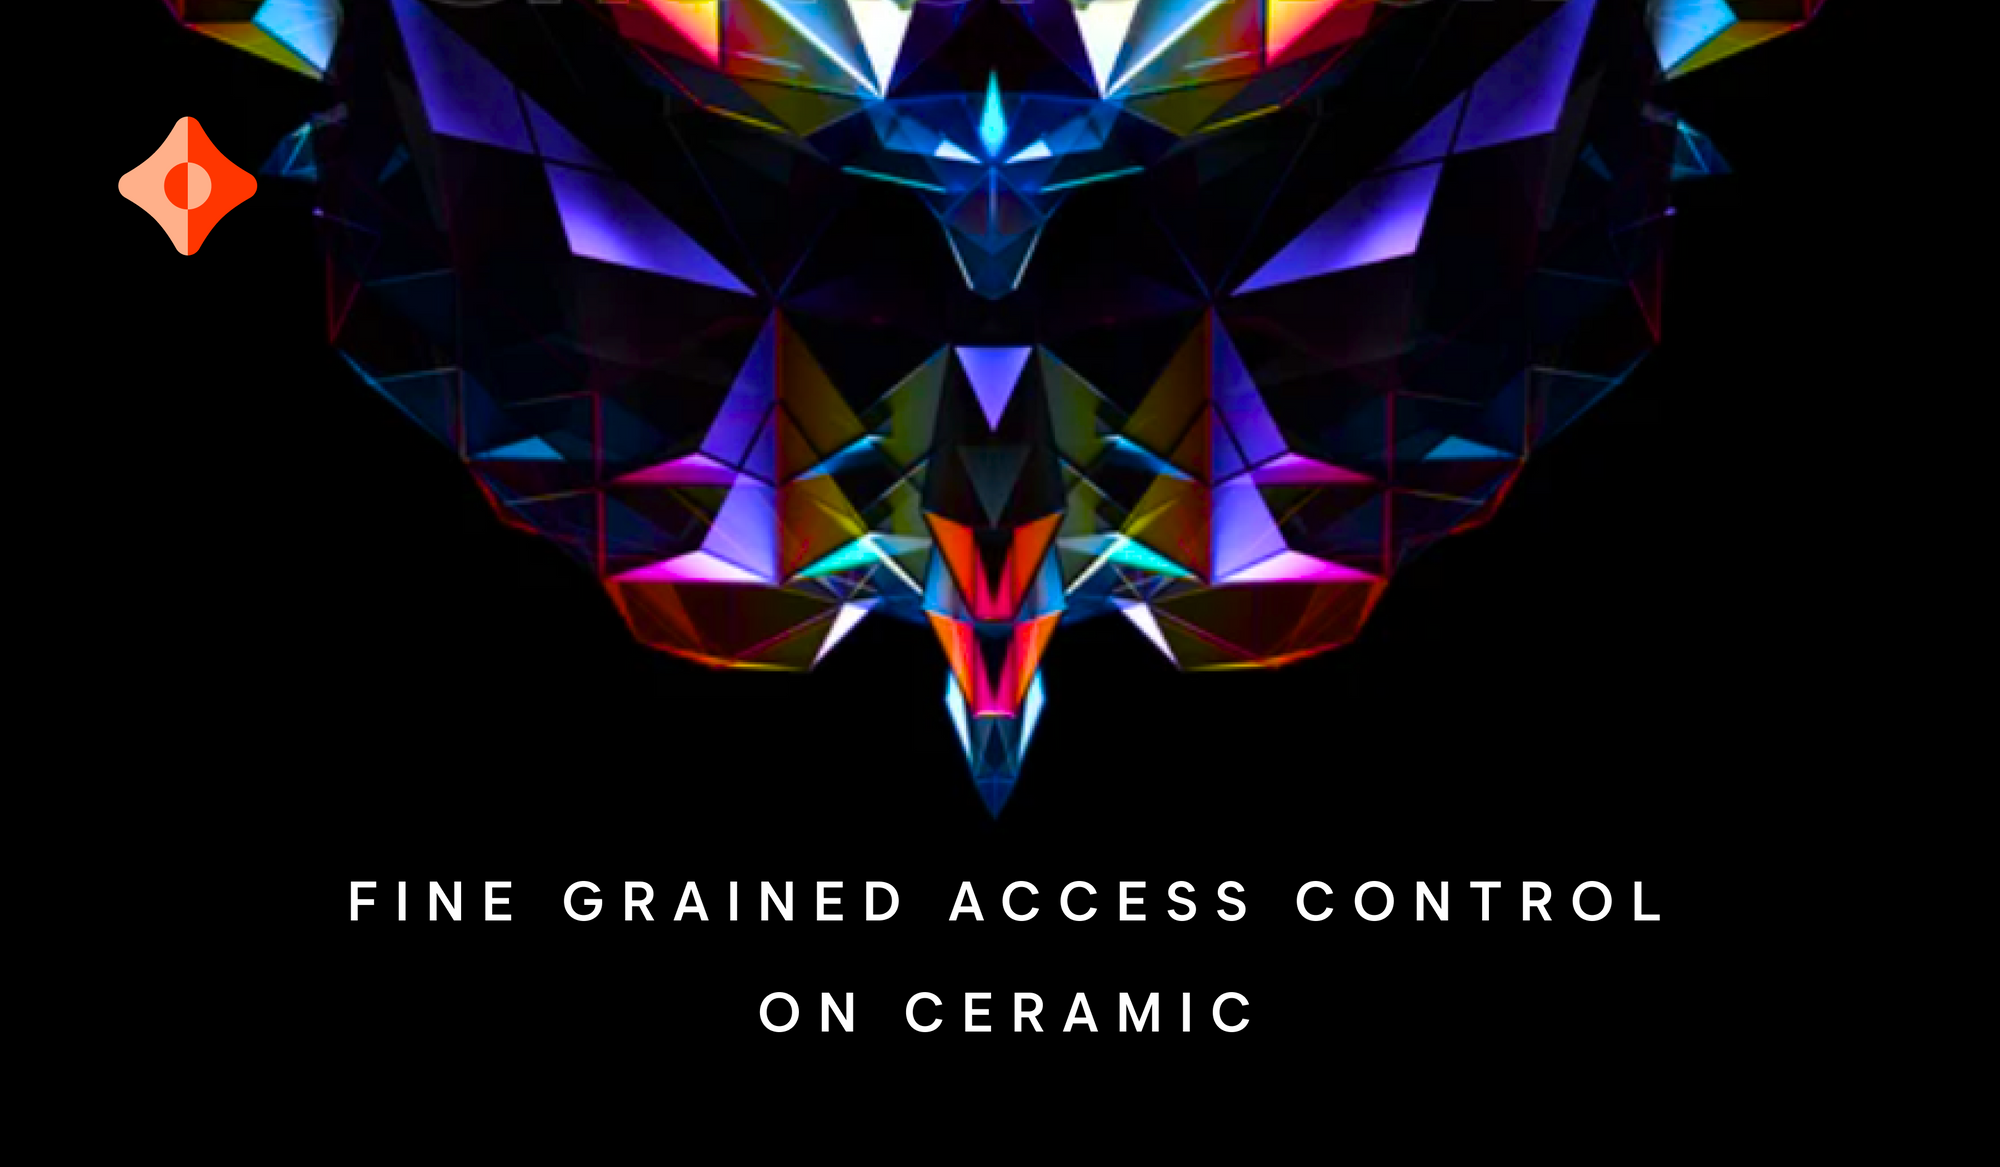 Building capability-based data security for Ceramic